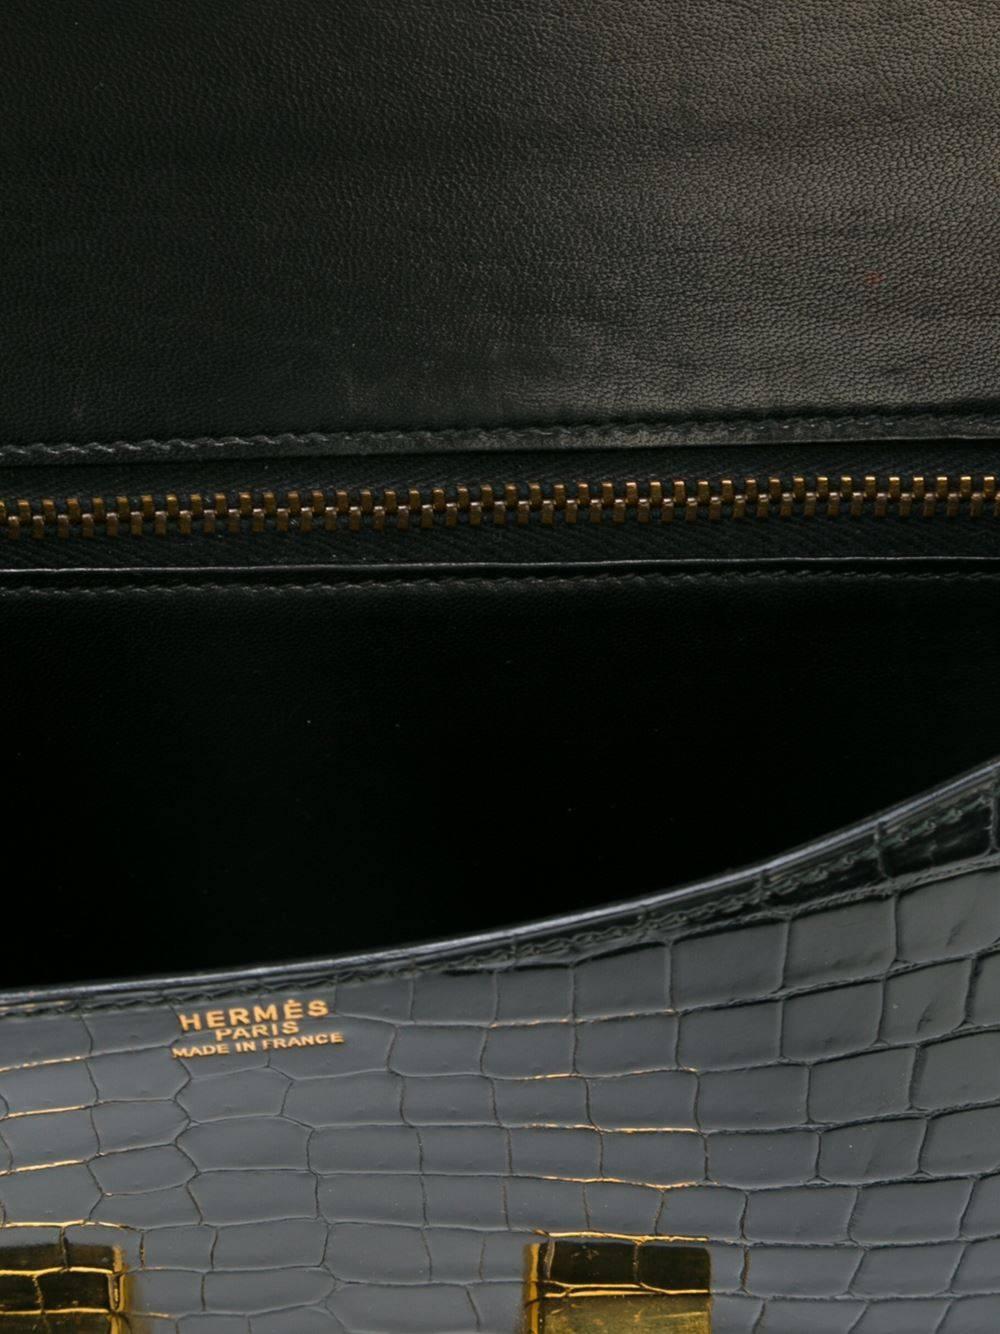 Stunning Hermès constance handbag of 1975 in exceptional condition. Made of black porosus crocodile leather and gold hardware finishing. 

Marked : Hermès Paris Made in France

Size :  17 x 23 x 4 cm - 6.7 x 9 x 1.6 in.  Strap: 75 cm - 29.2